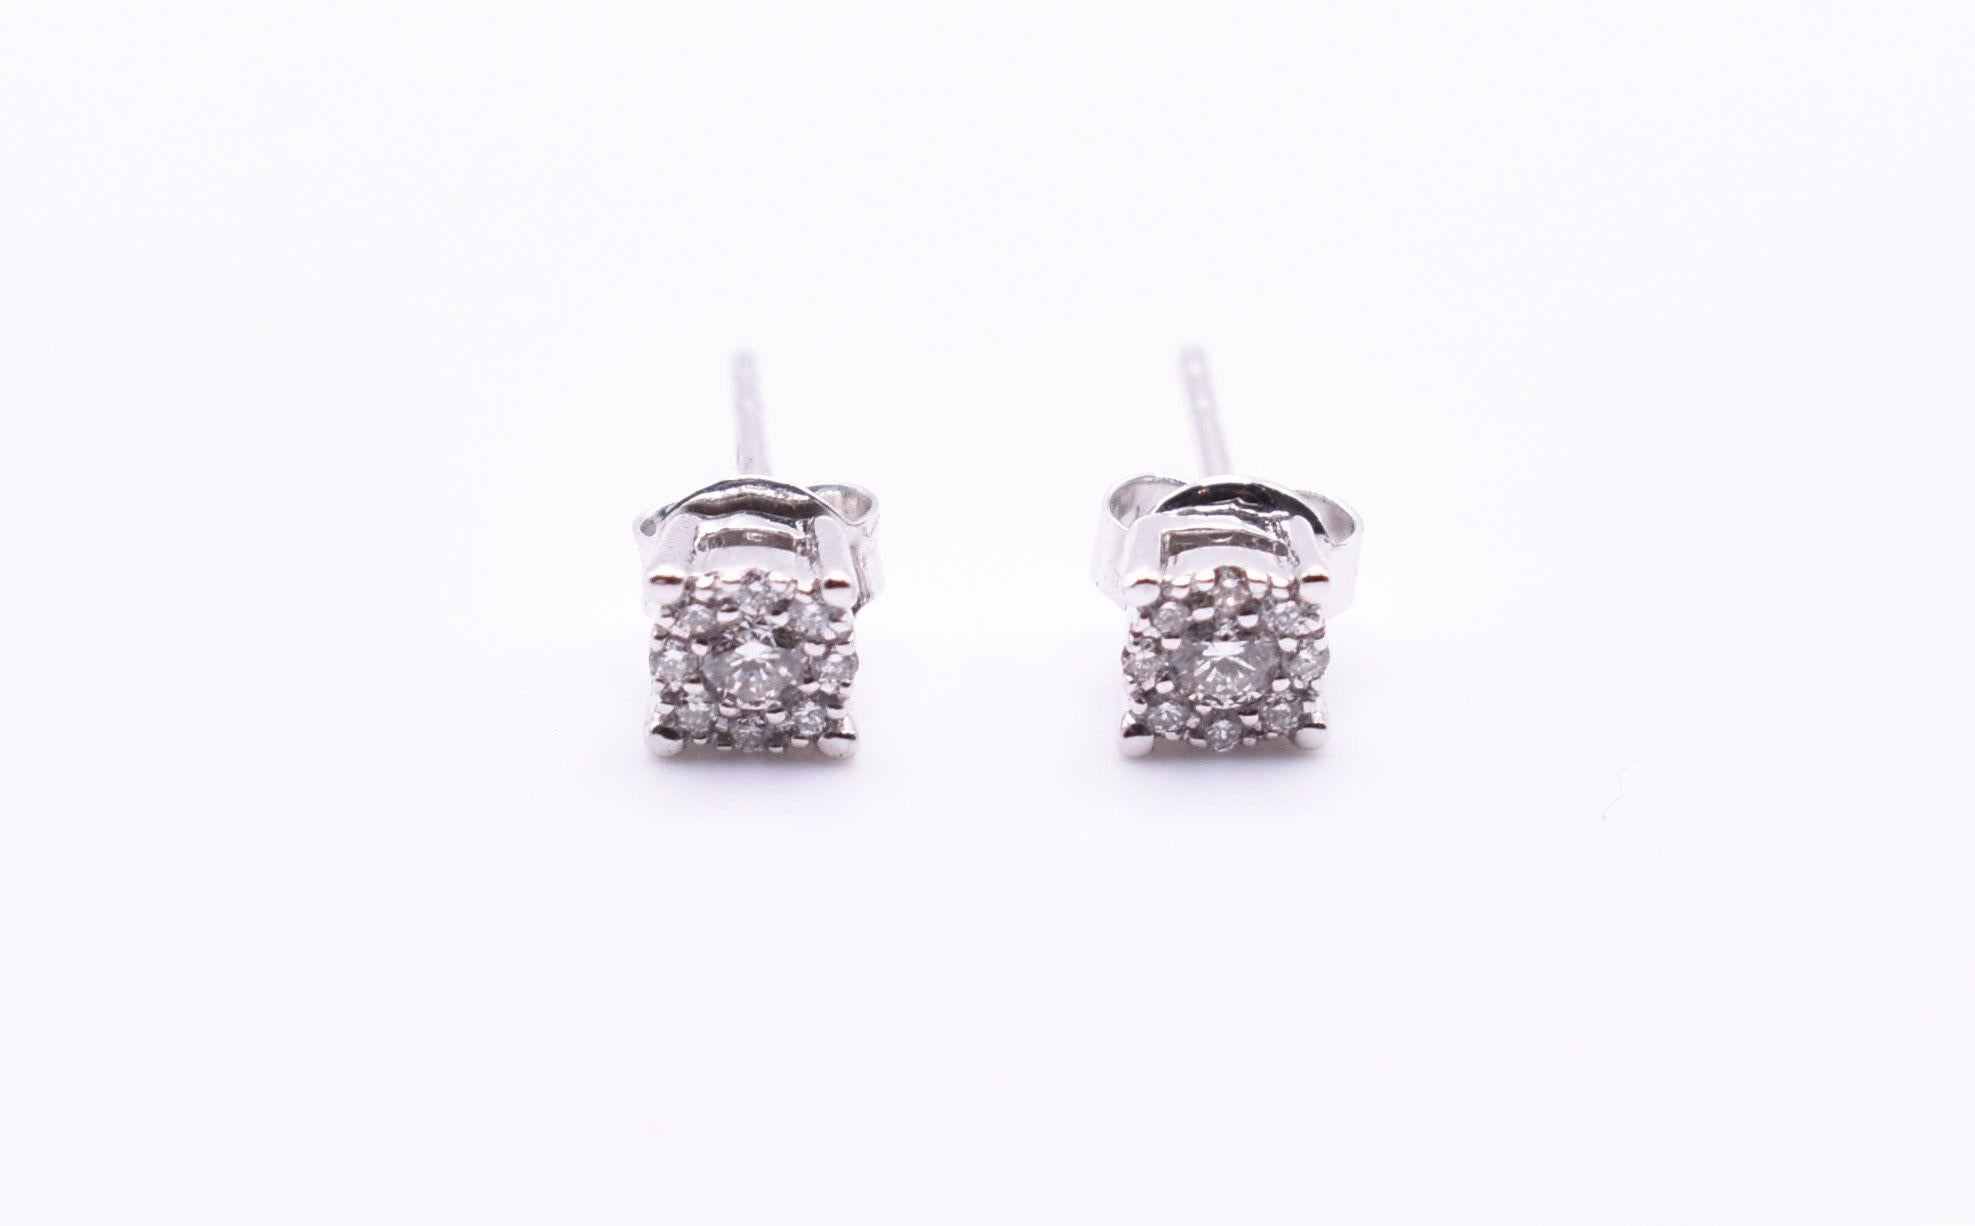 For sale is a lovely pair of 18k white gold illusion diamond stud earrings. Gold = 1.56g. Diamonds = 0.23ct